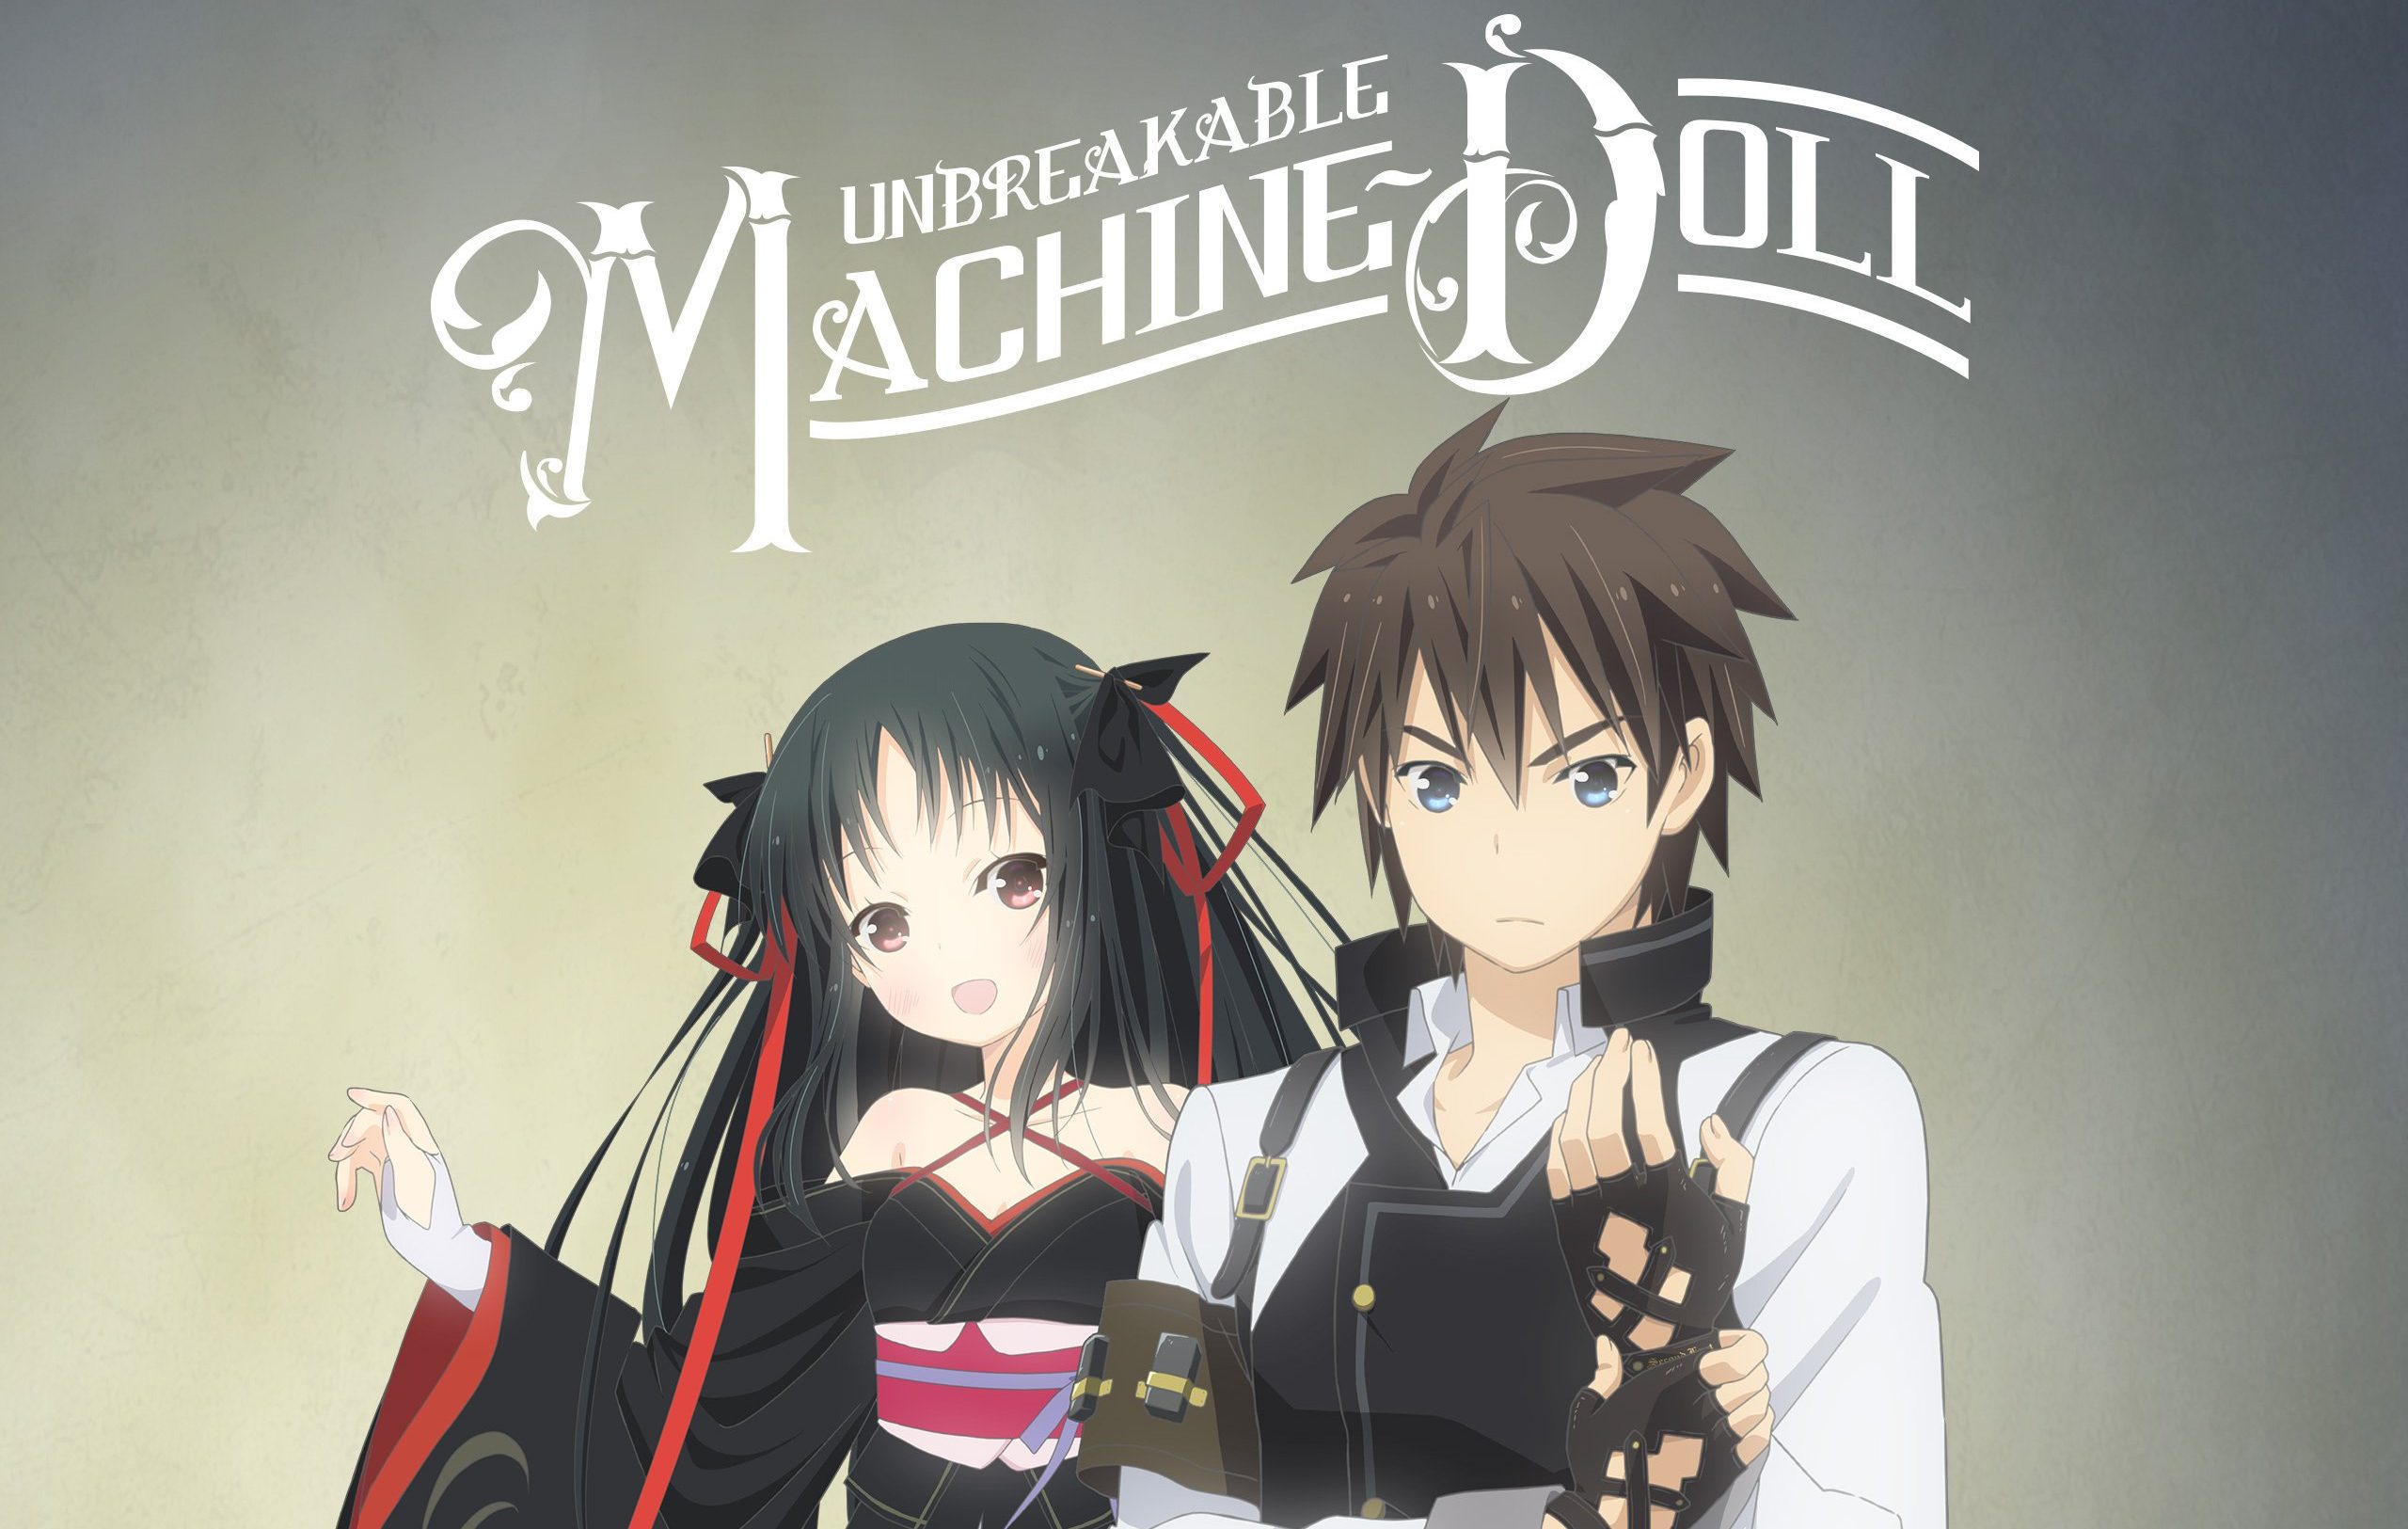 Unbreakable Machine Doll Season 2: Canceled! But Why? Can Fans Save It?